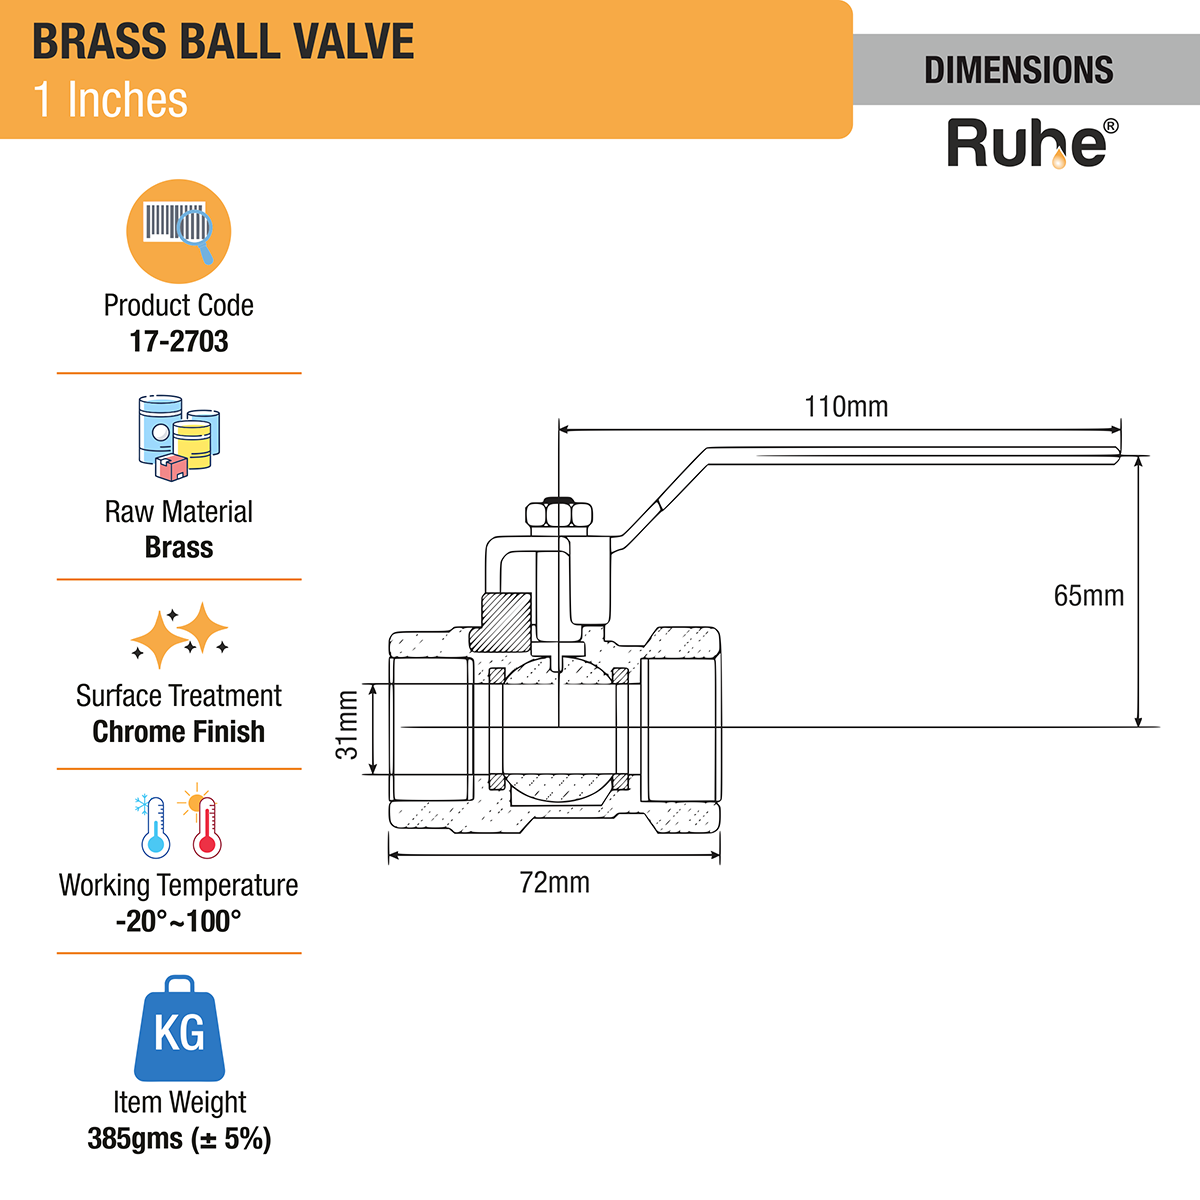 Brass Ball Valve (1 Inch) dimensions and size